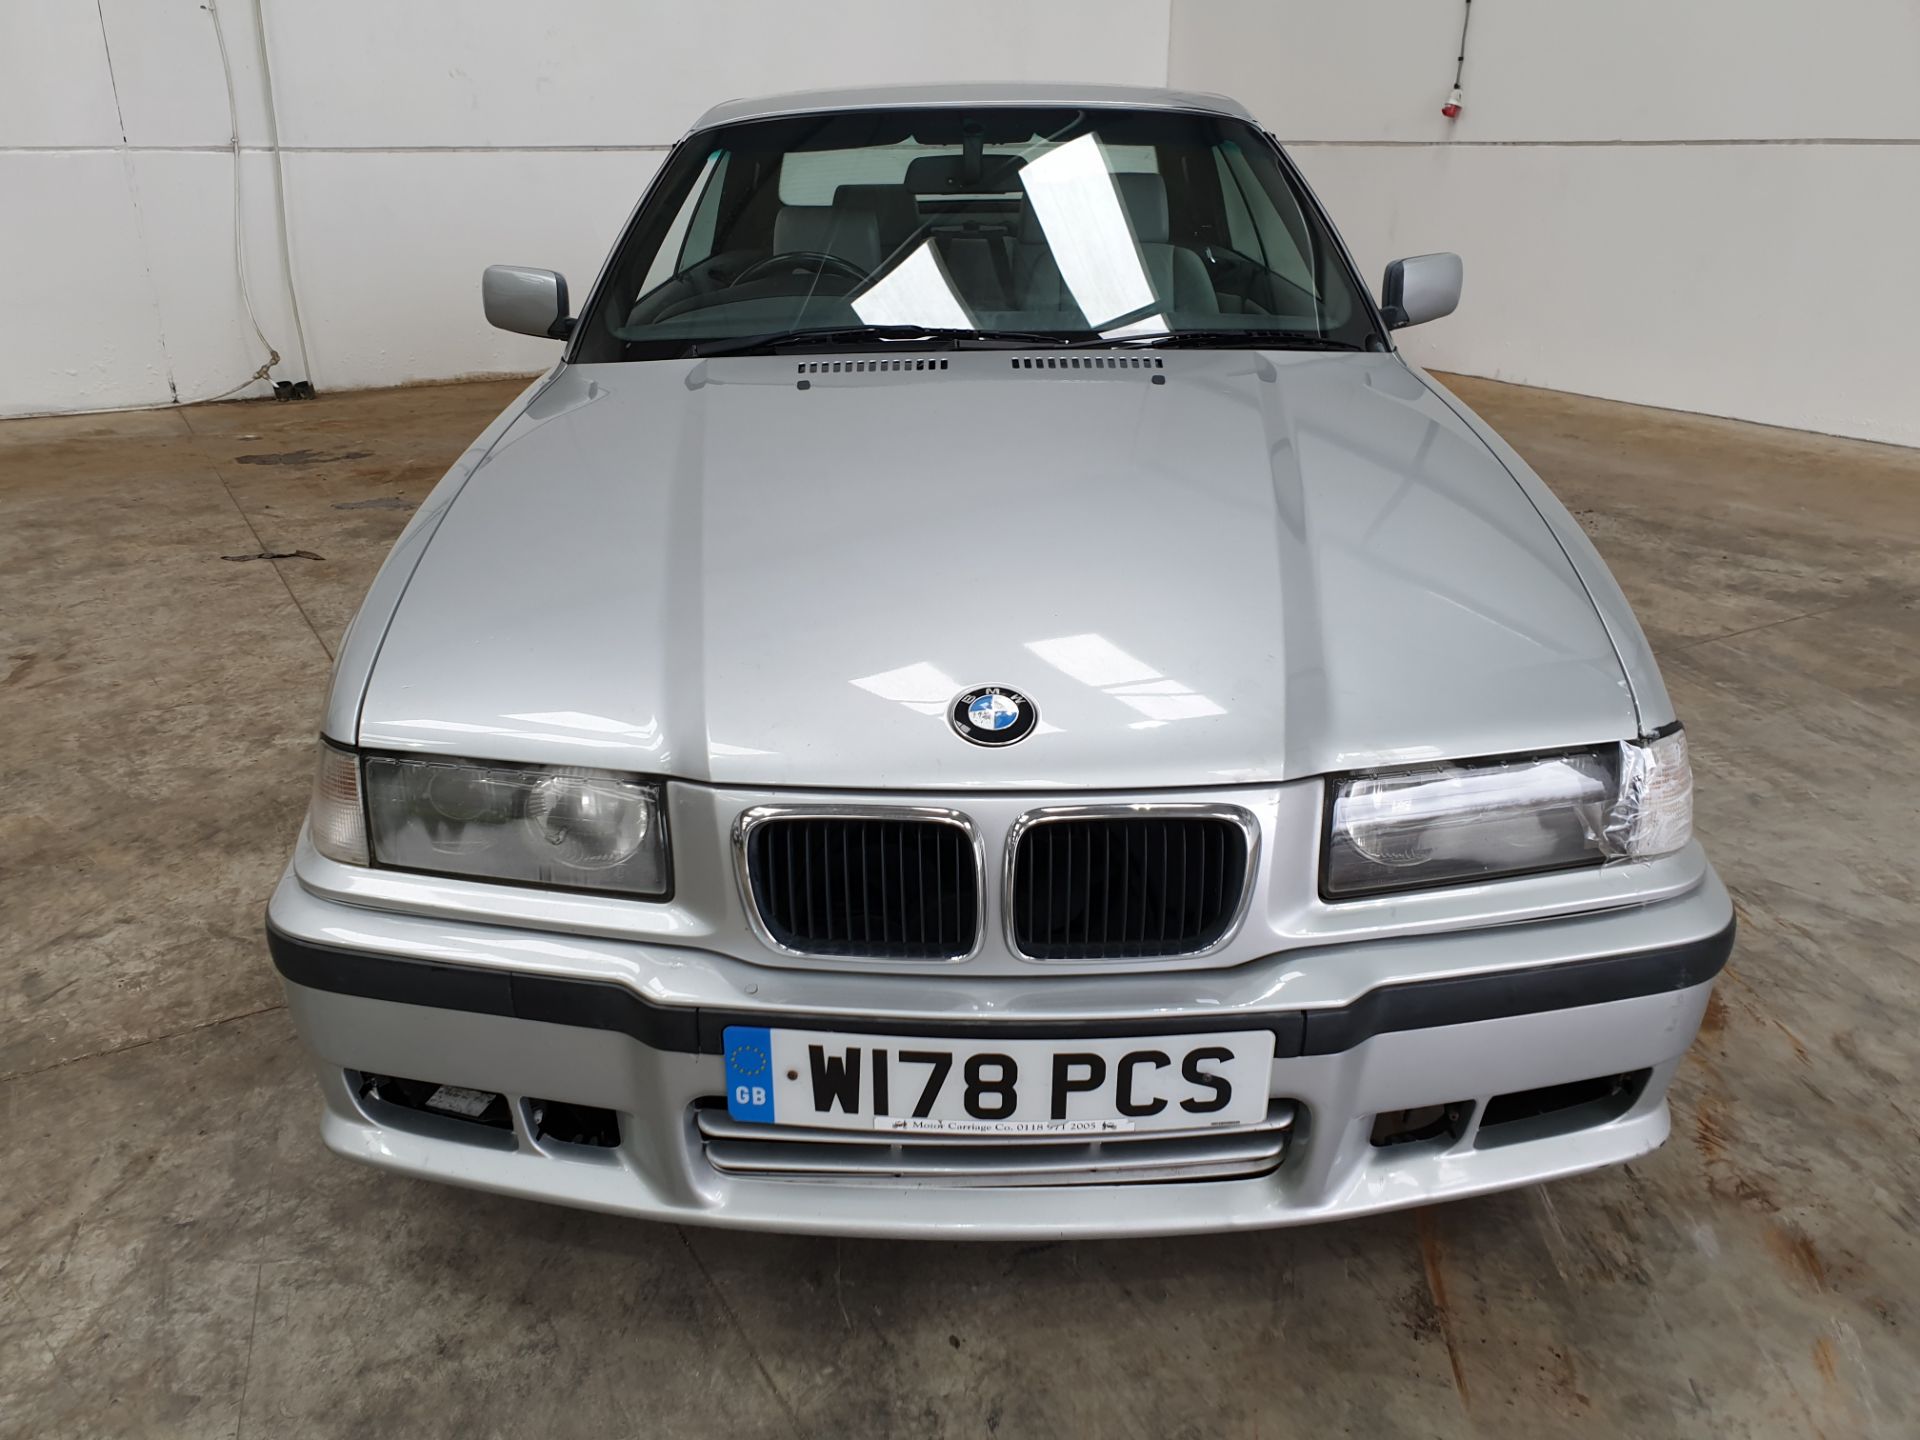 BMW 323 Convertible - Image 8 of 13